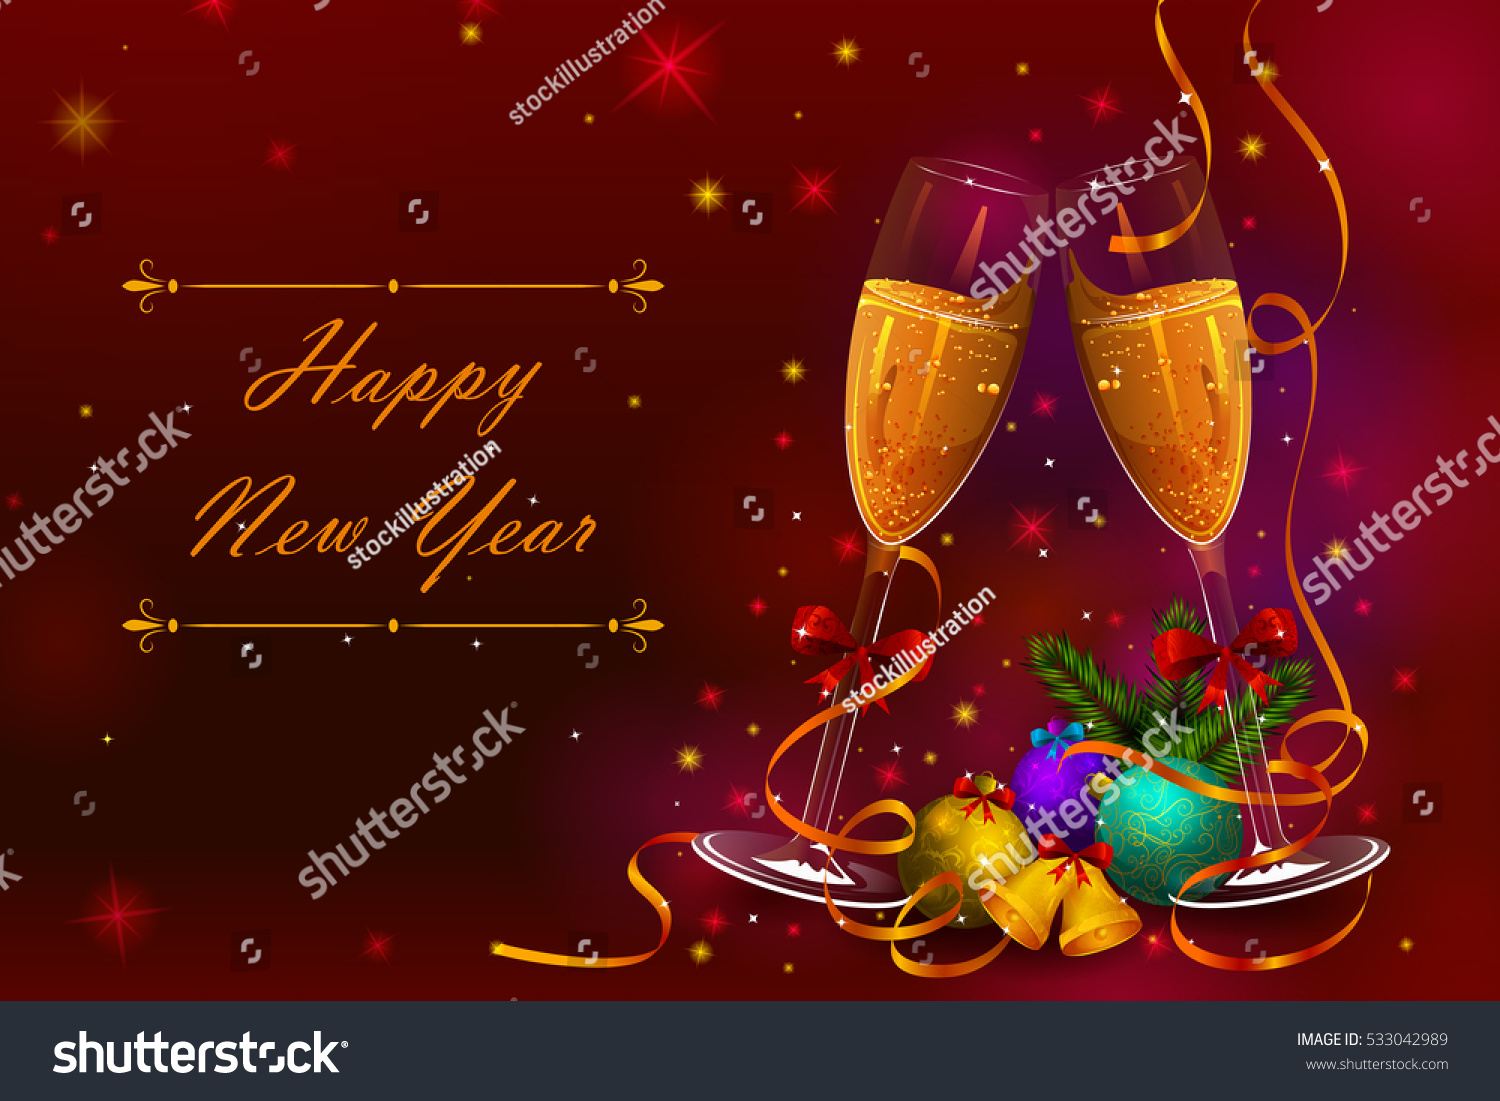 Happy New Year holiday greetings background in vector